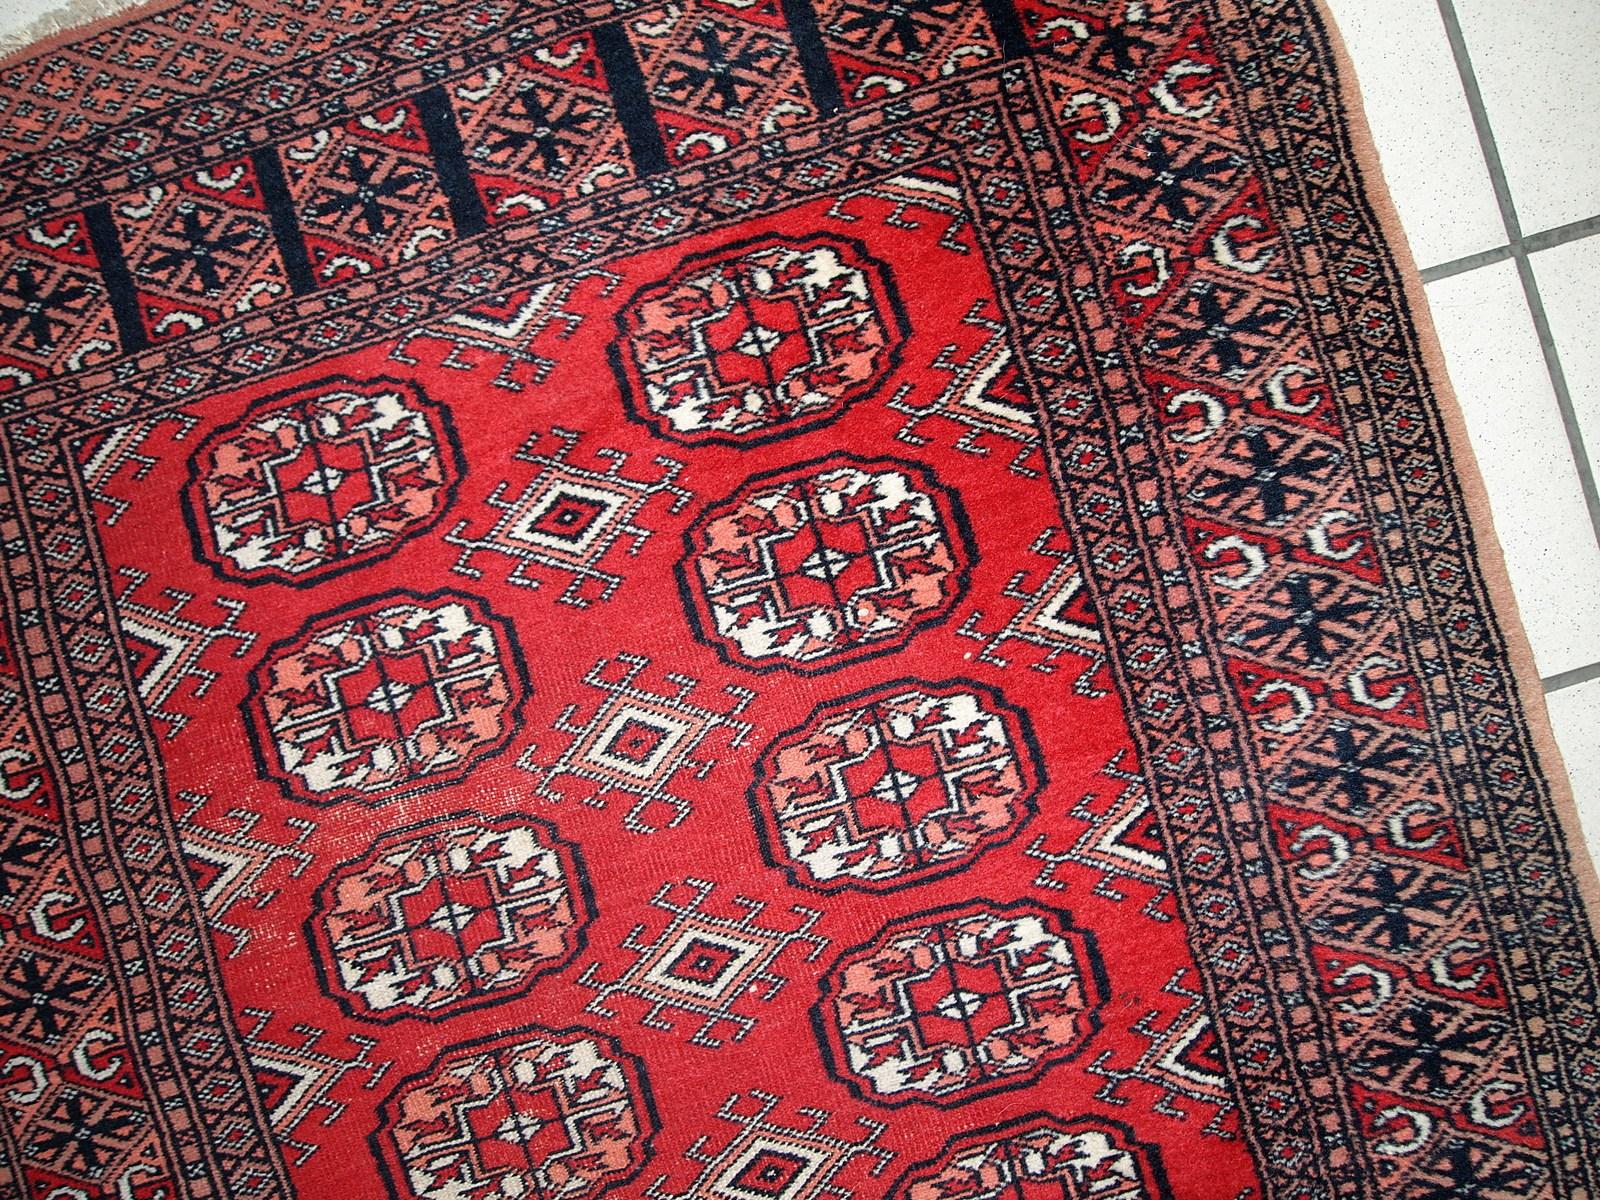 Handmade vintage Uzbek Bukhara runner in original condition, it has some age wear. The rug made in soft wool in the middle of 20th century. 

-condition: original, some signs of age,

-circa: 1960s,

-size: 2.7' x 9' (83cm x 275cm),

-material: